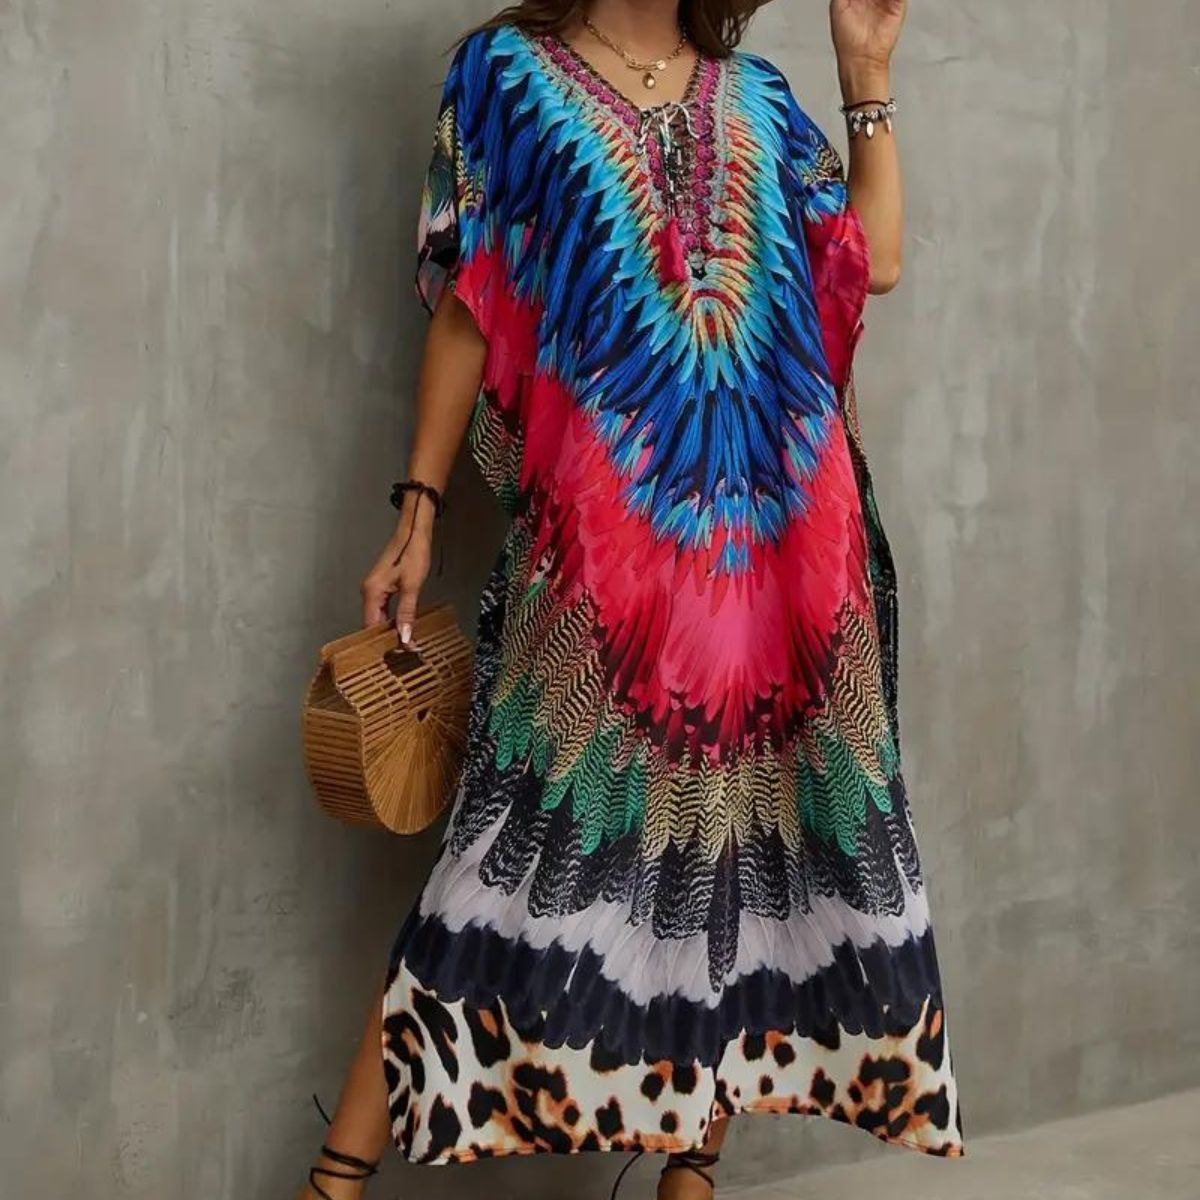 Feather Boho Cover Up Dress